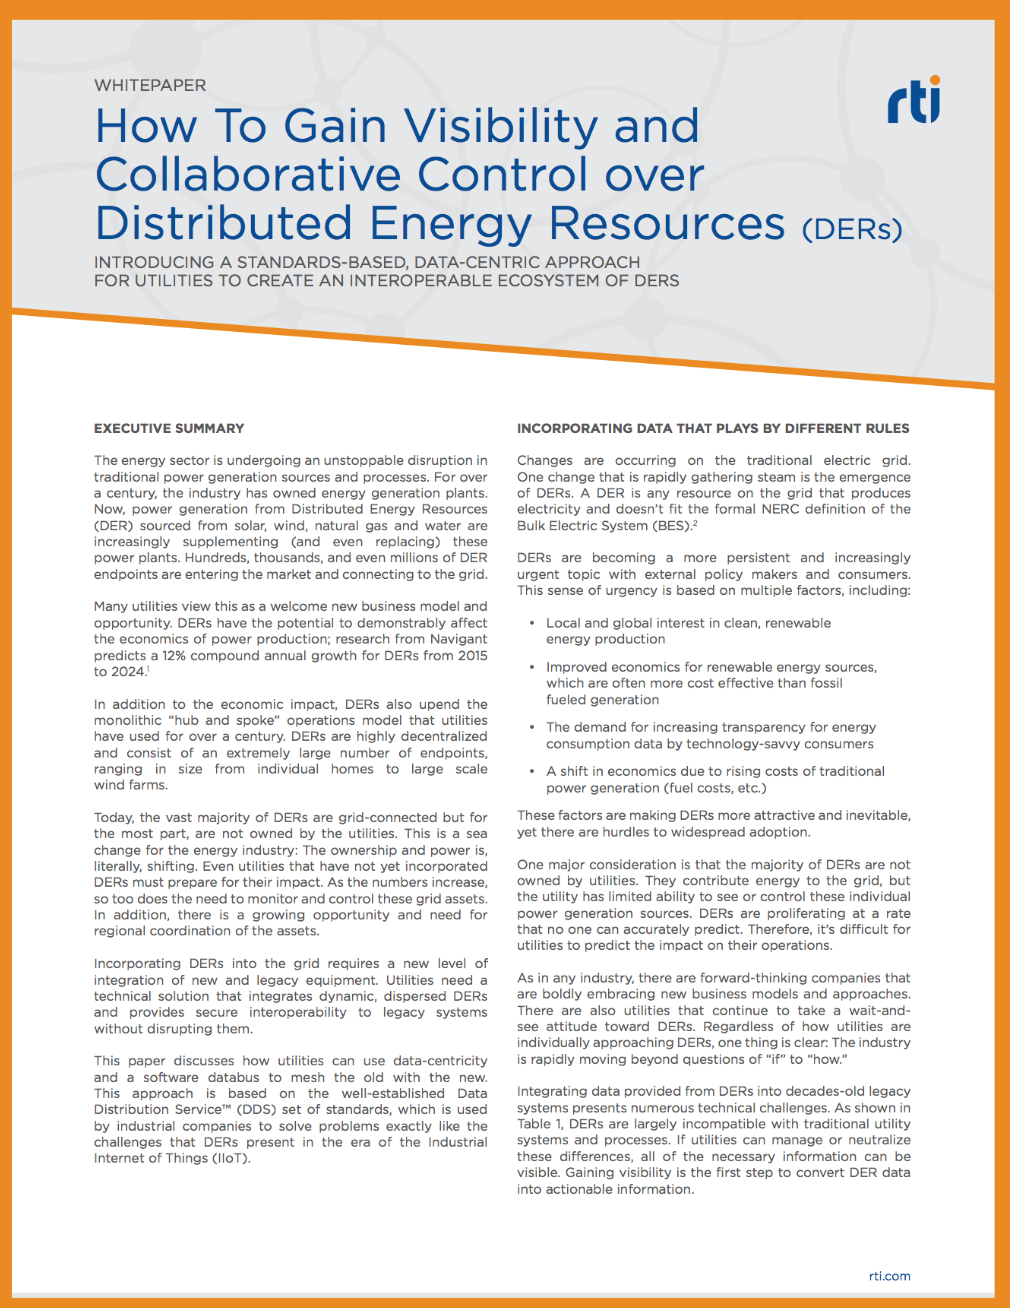 Gain visibility and collaborative control over Distributed Energy Resources (DERs)